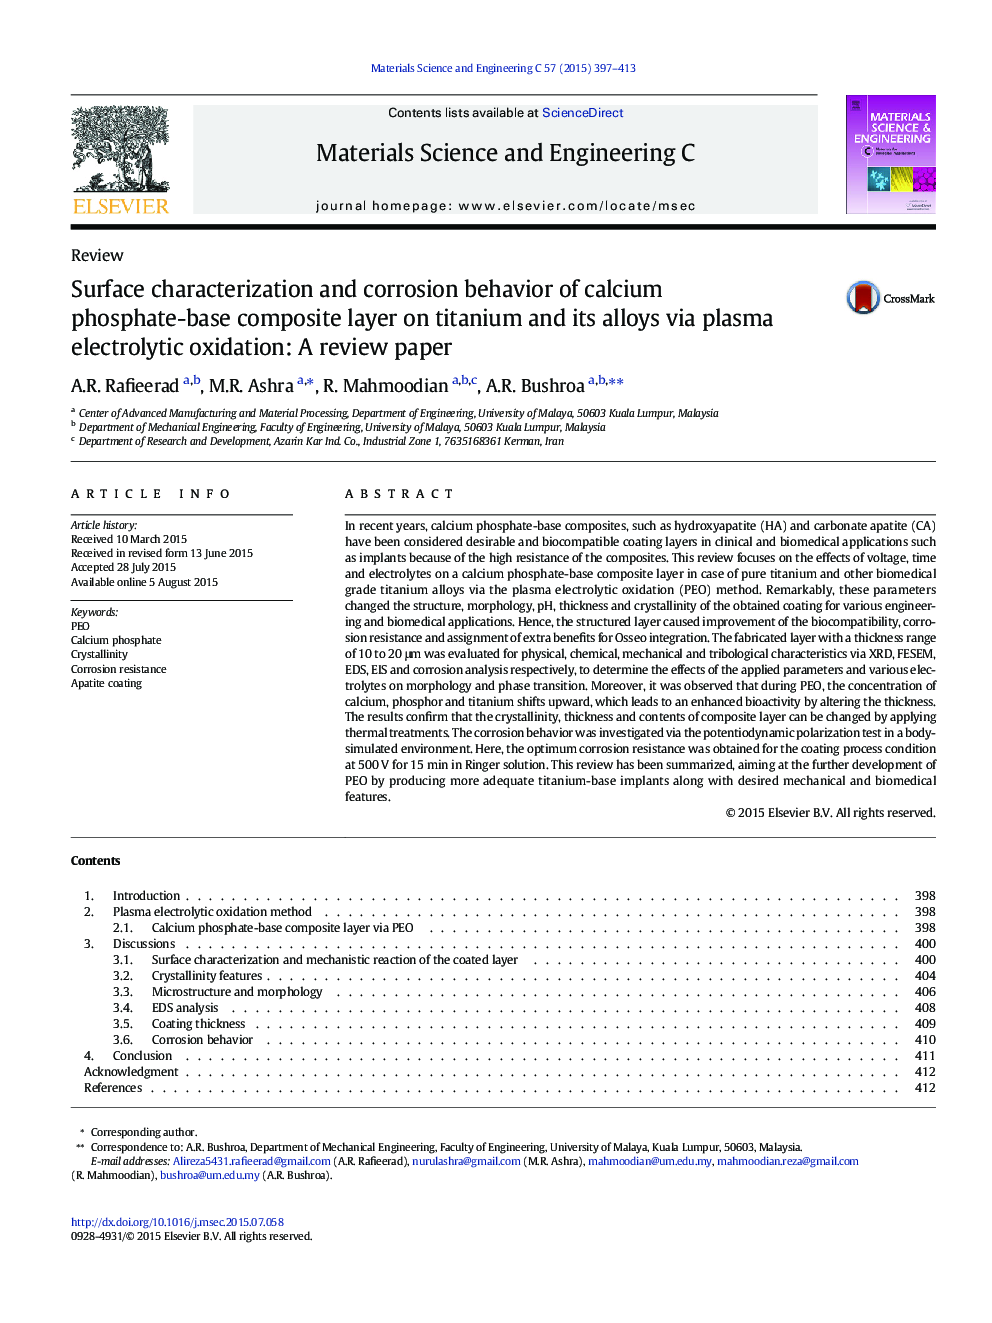 Surface characterization and corrosion behavior of calcium phosphate-base composite layer on titanium and its alloys via plasma electrolytic oxidation: A review paper